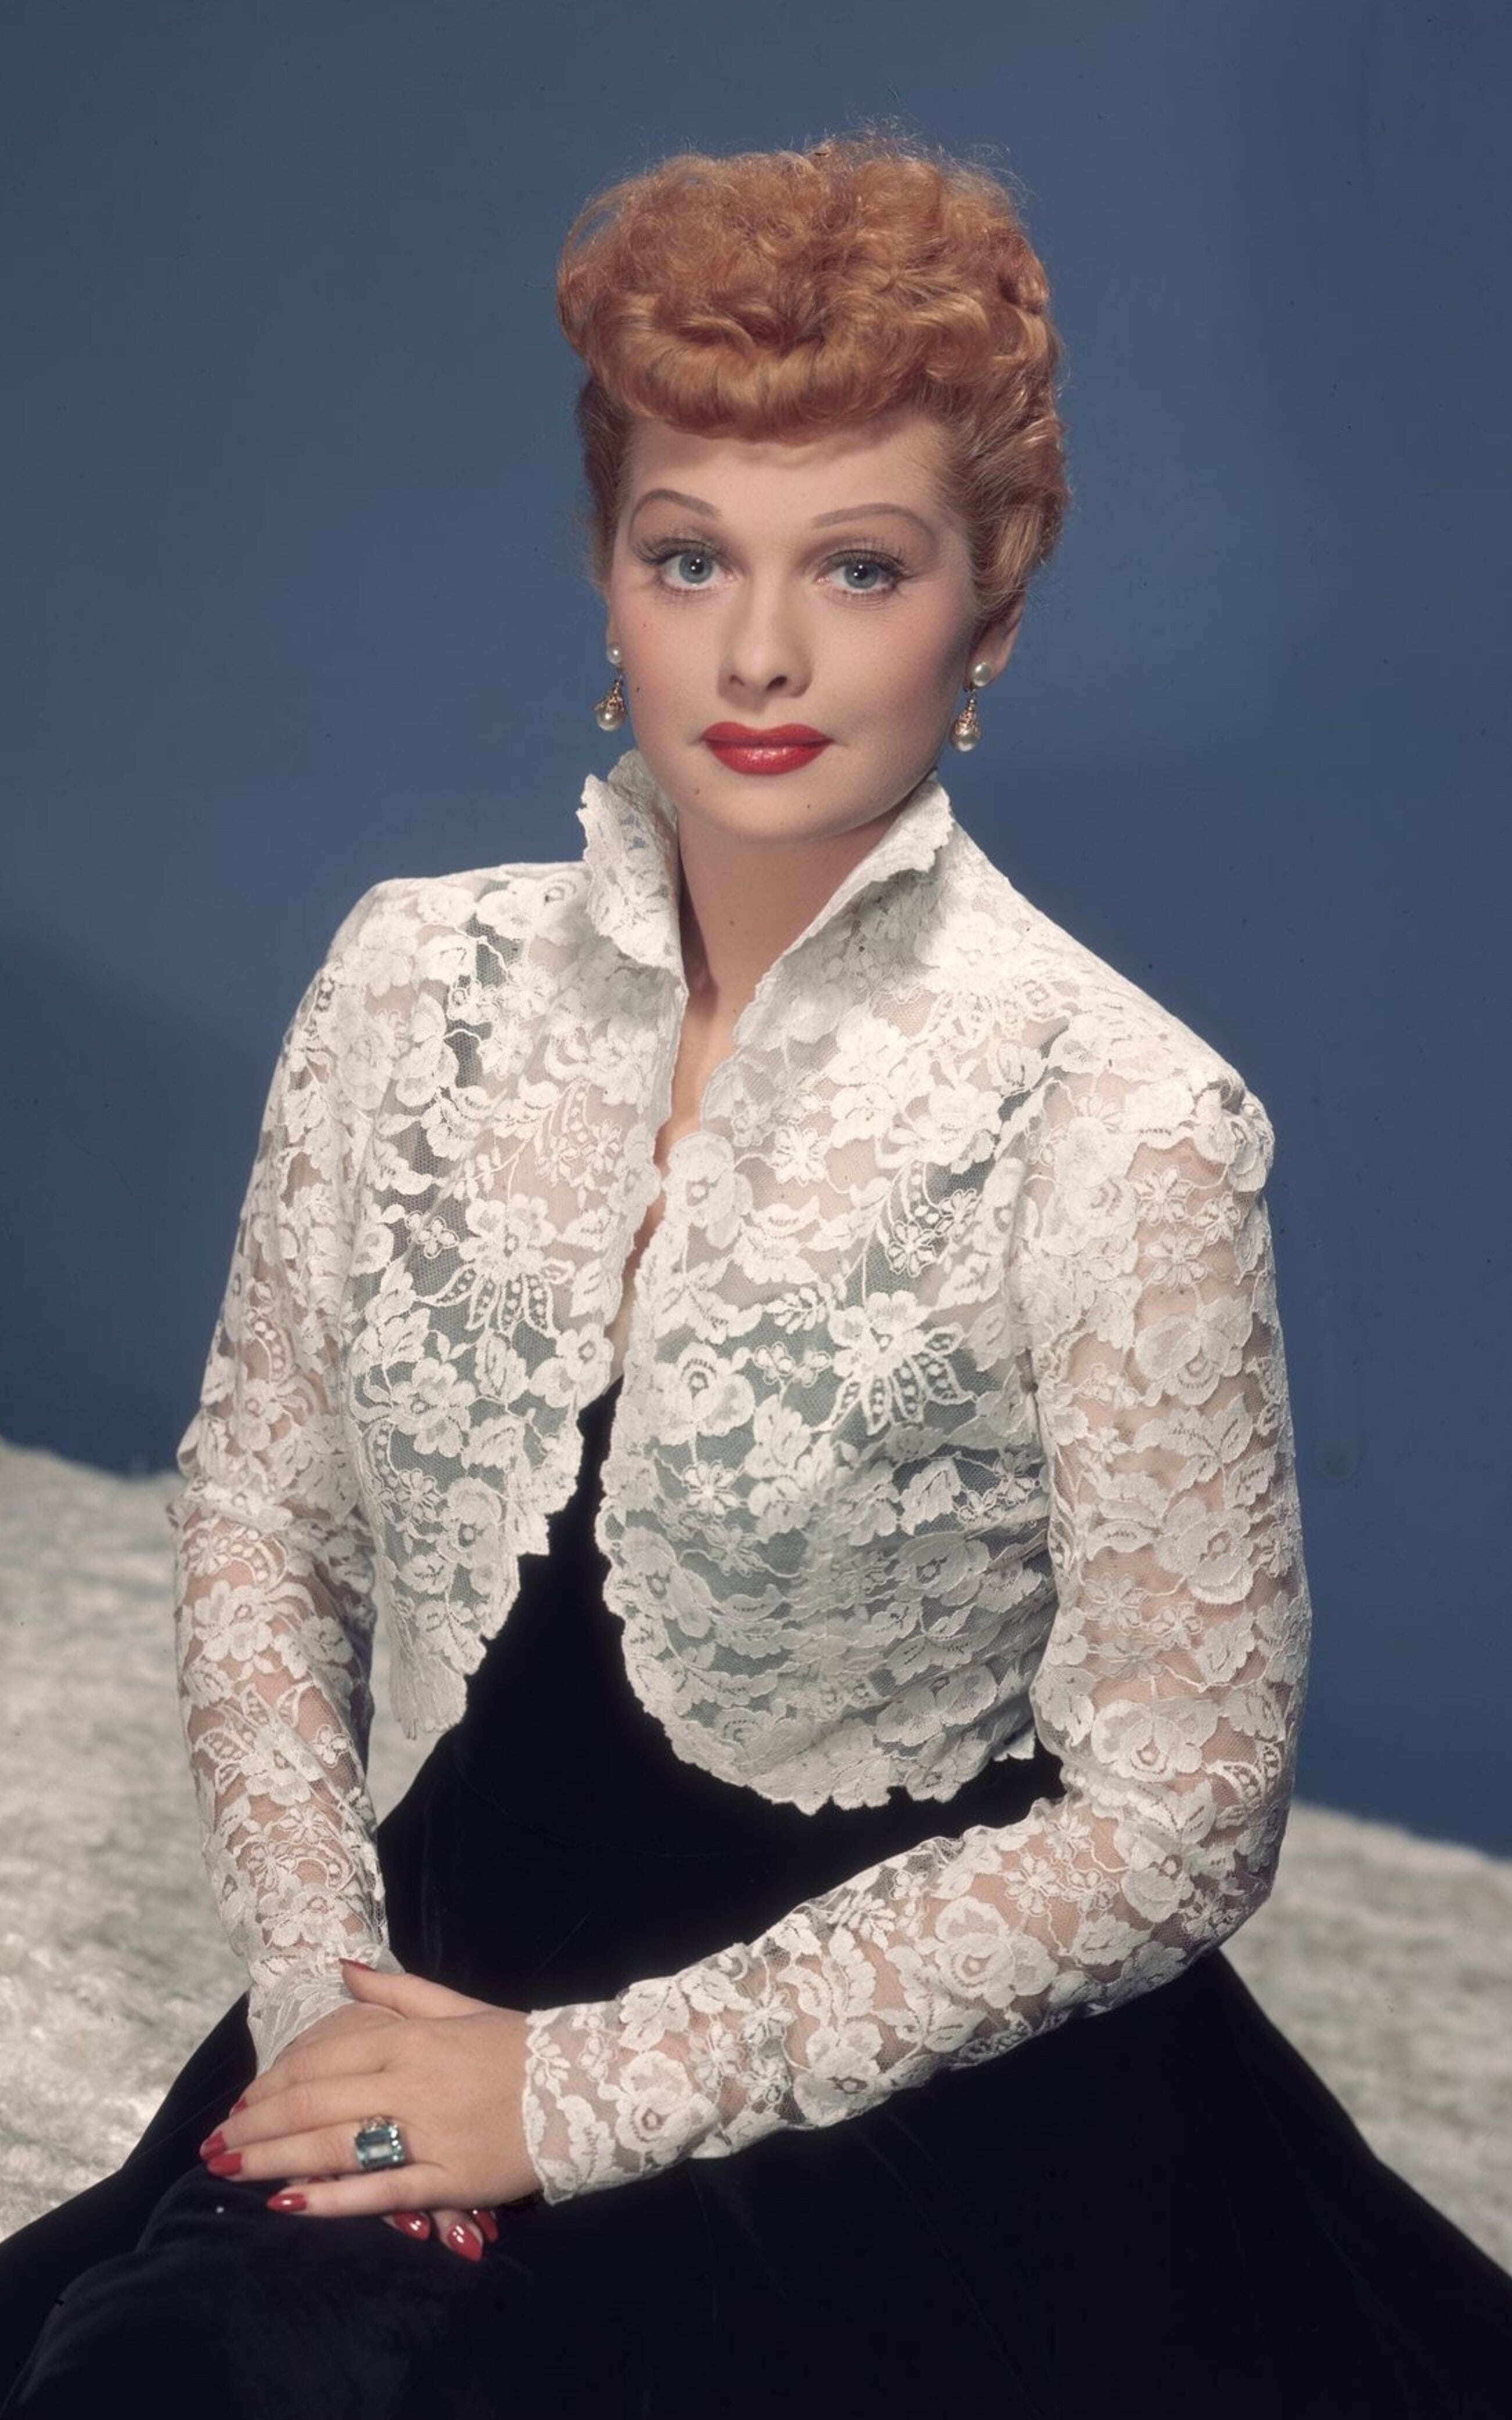 REPOST - Lucille Ball Documentaire - We Love Lucy